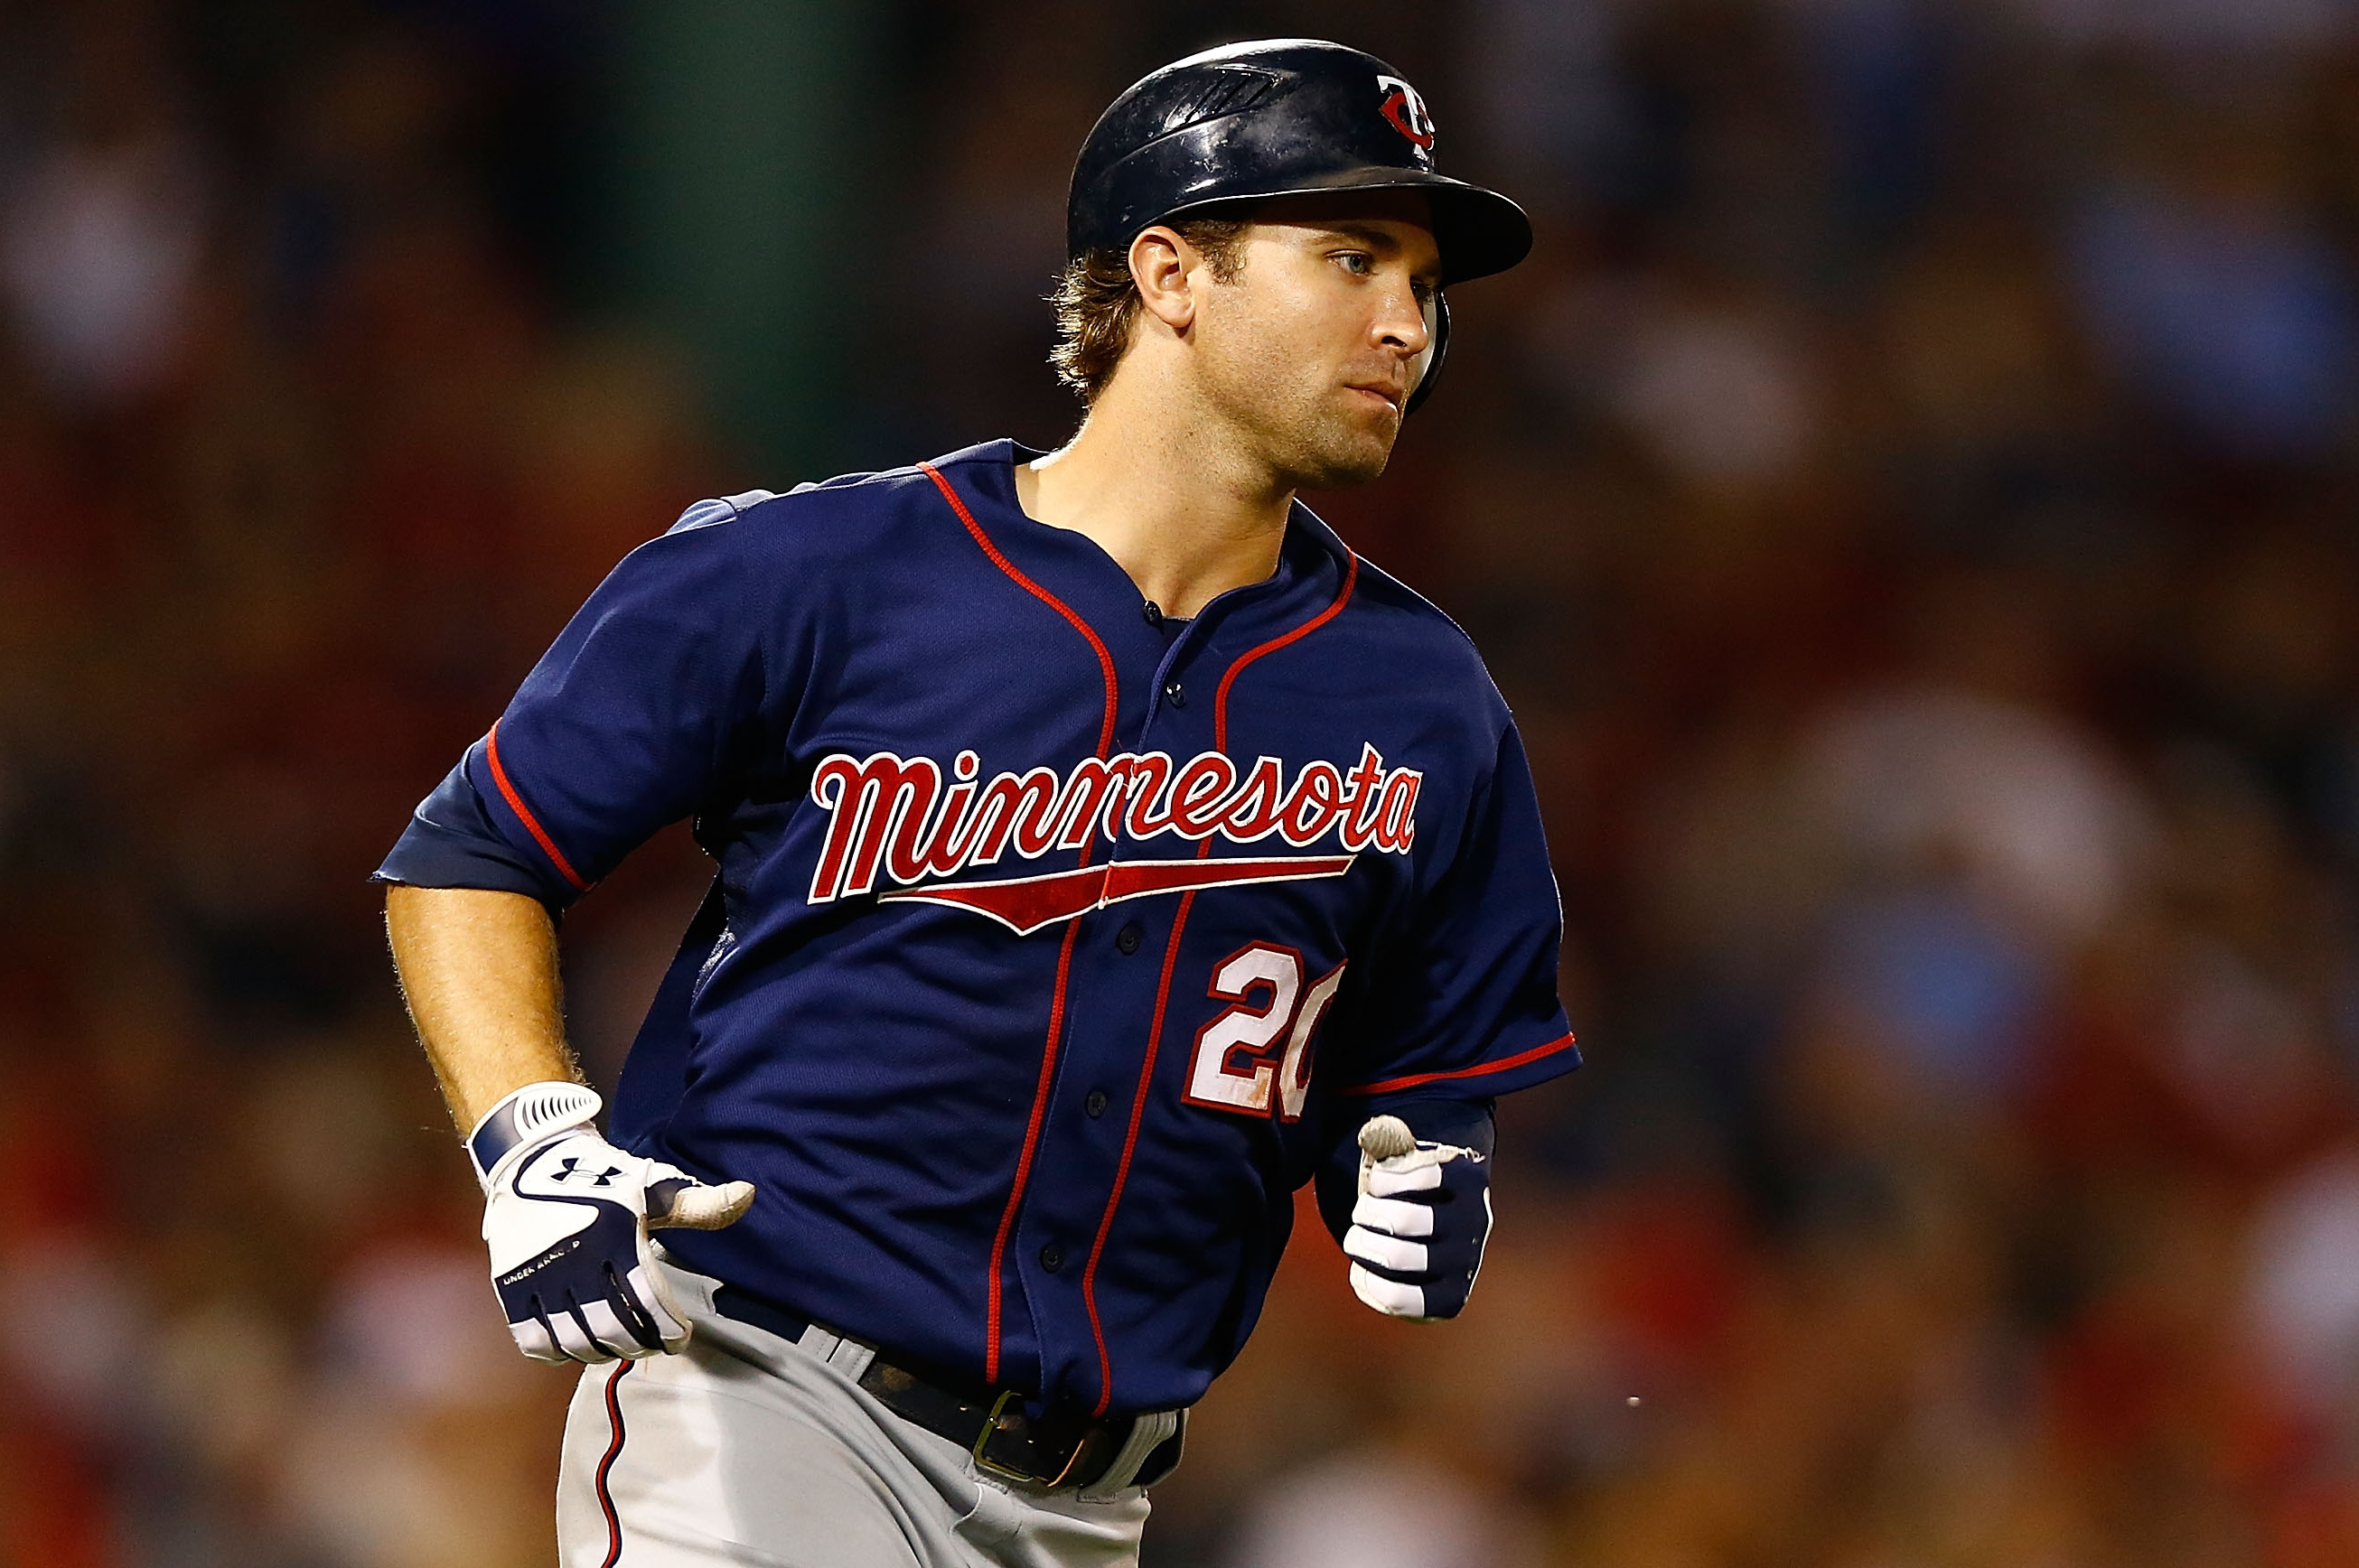 Minnesota Twins Even When Times Are Tough, Brian Dozier Does It the